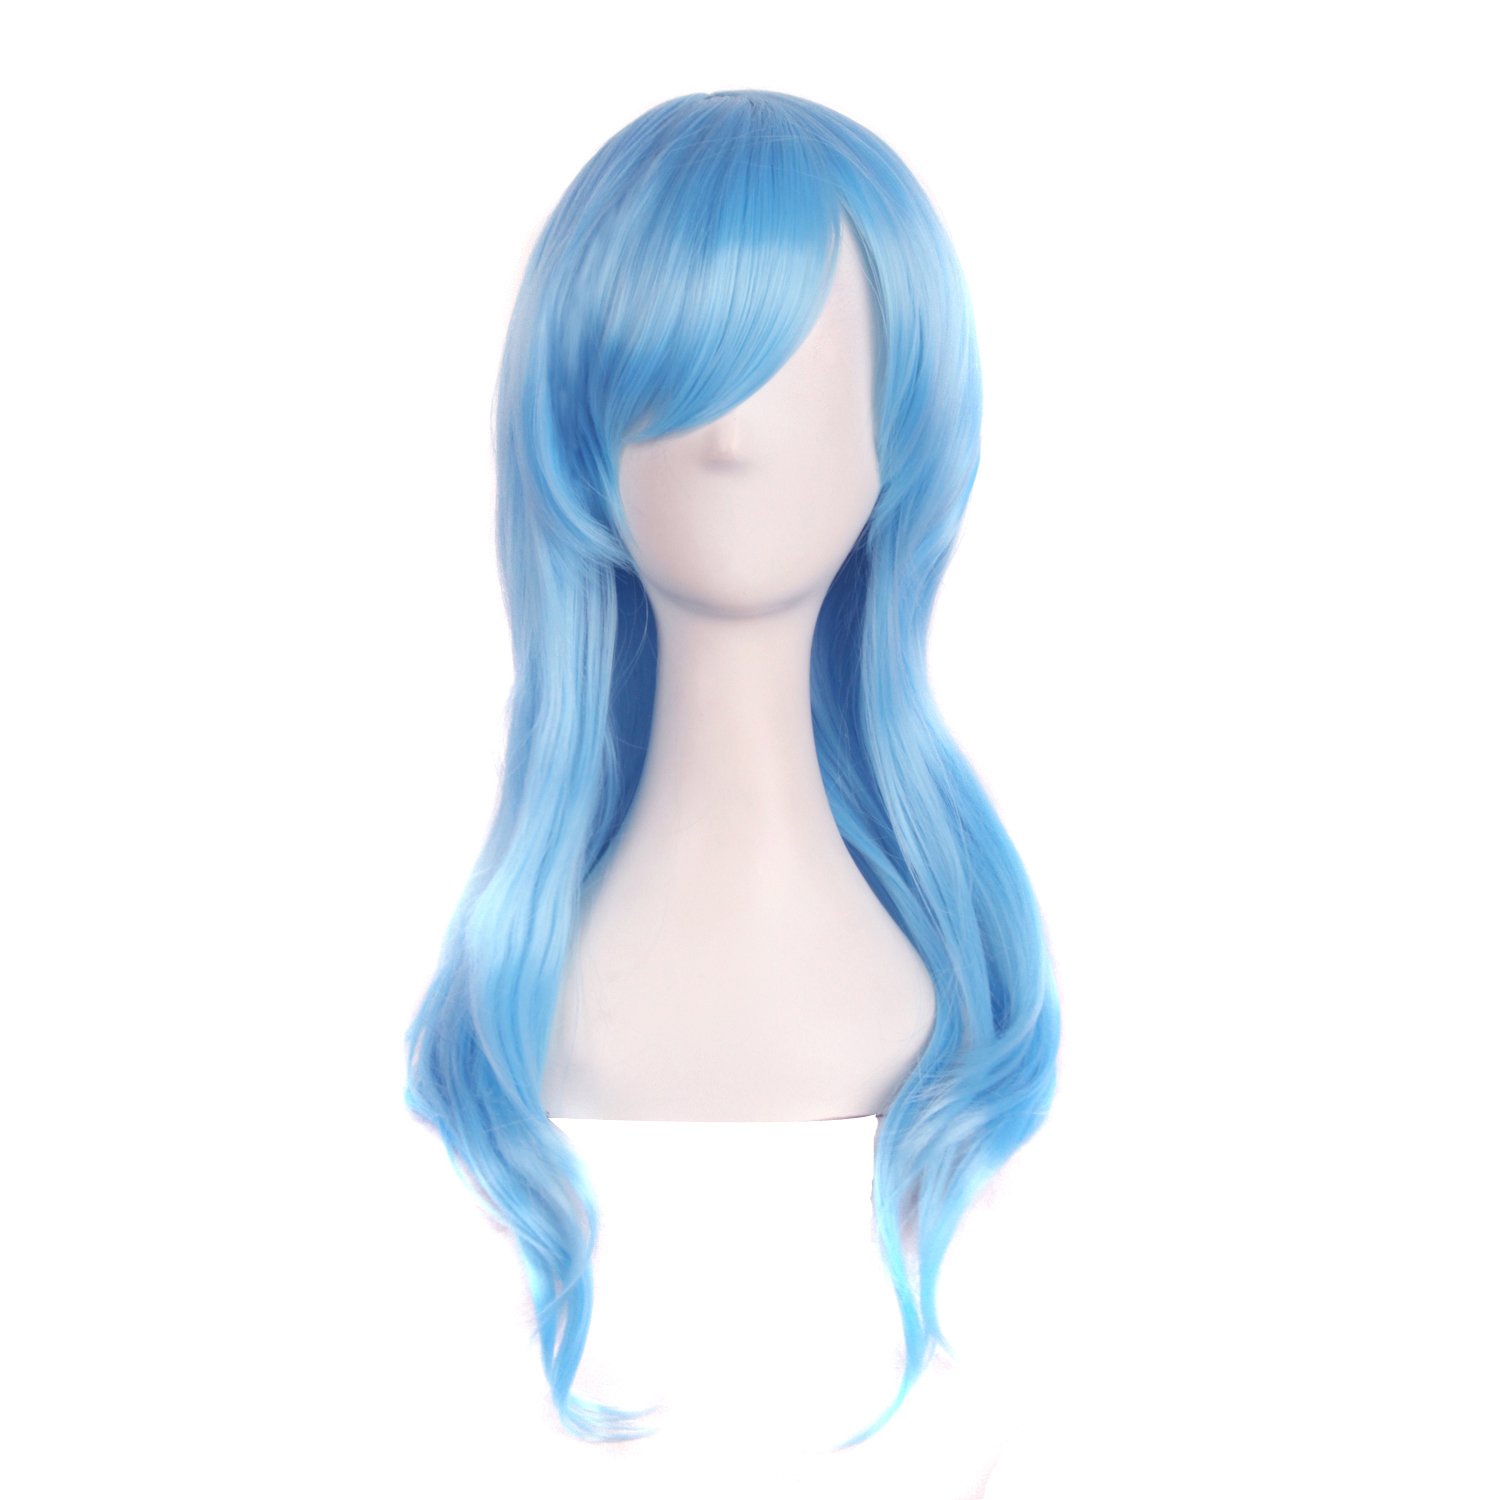 Price:$8.99     MapofBeauty 28" 70cm Long Curly Hair Ends Costume Cosplay Wig (Azure)   Hair Replacement Wigs   Beauty